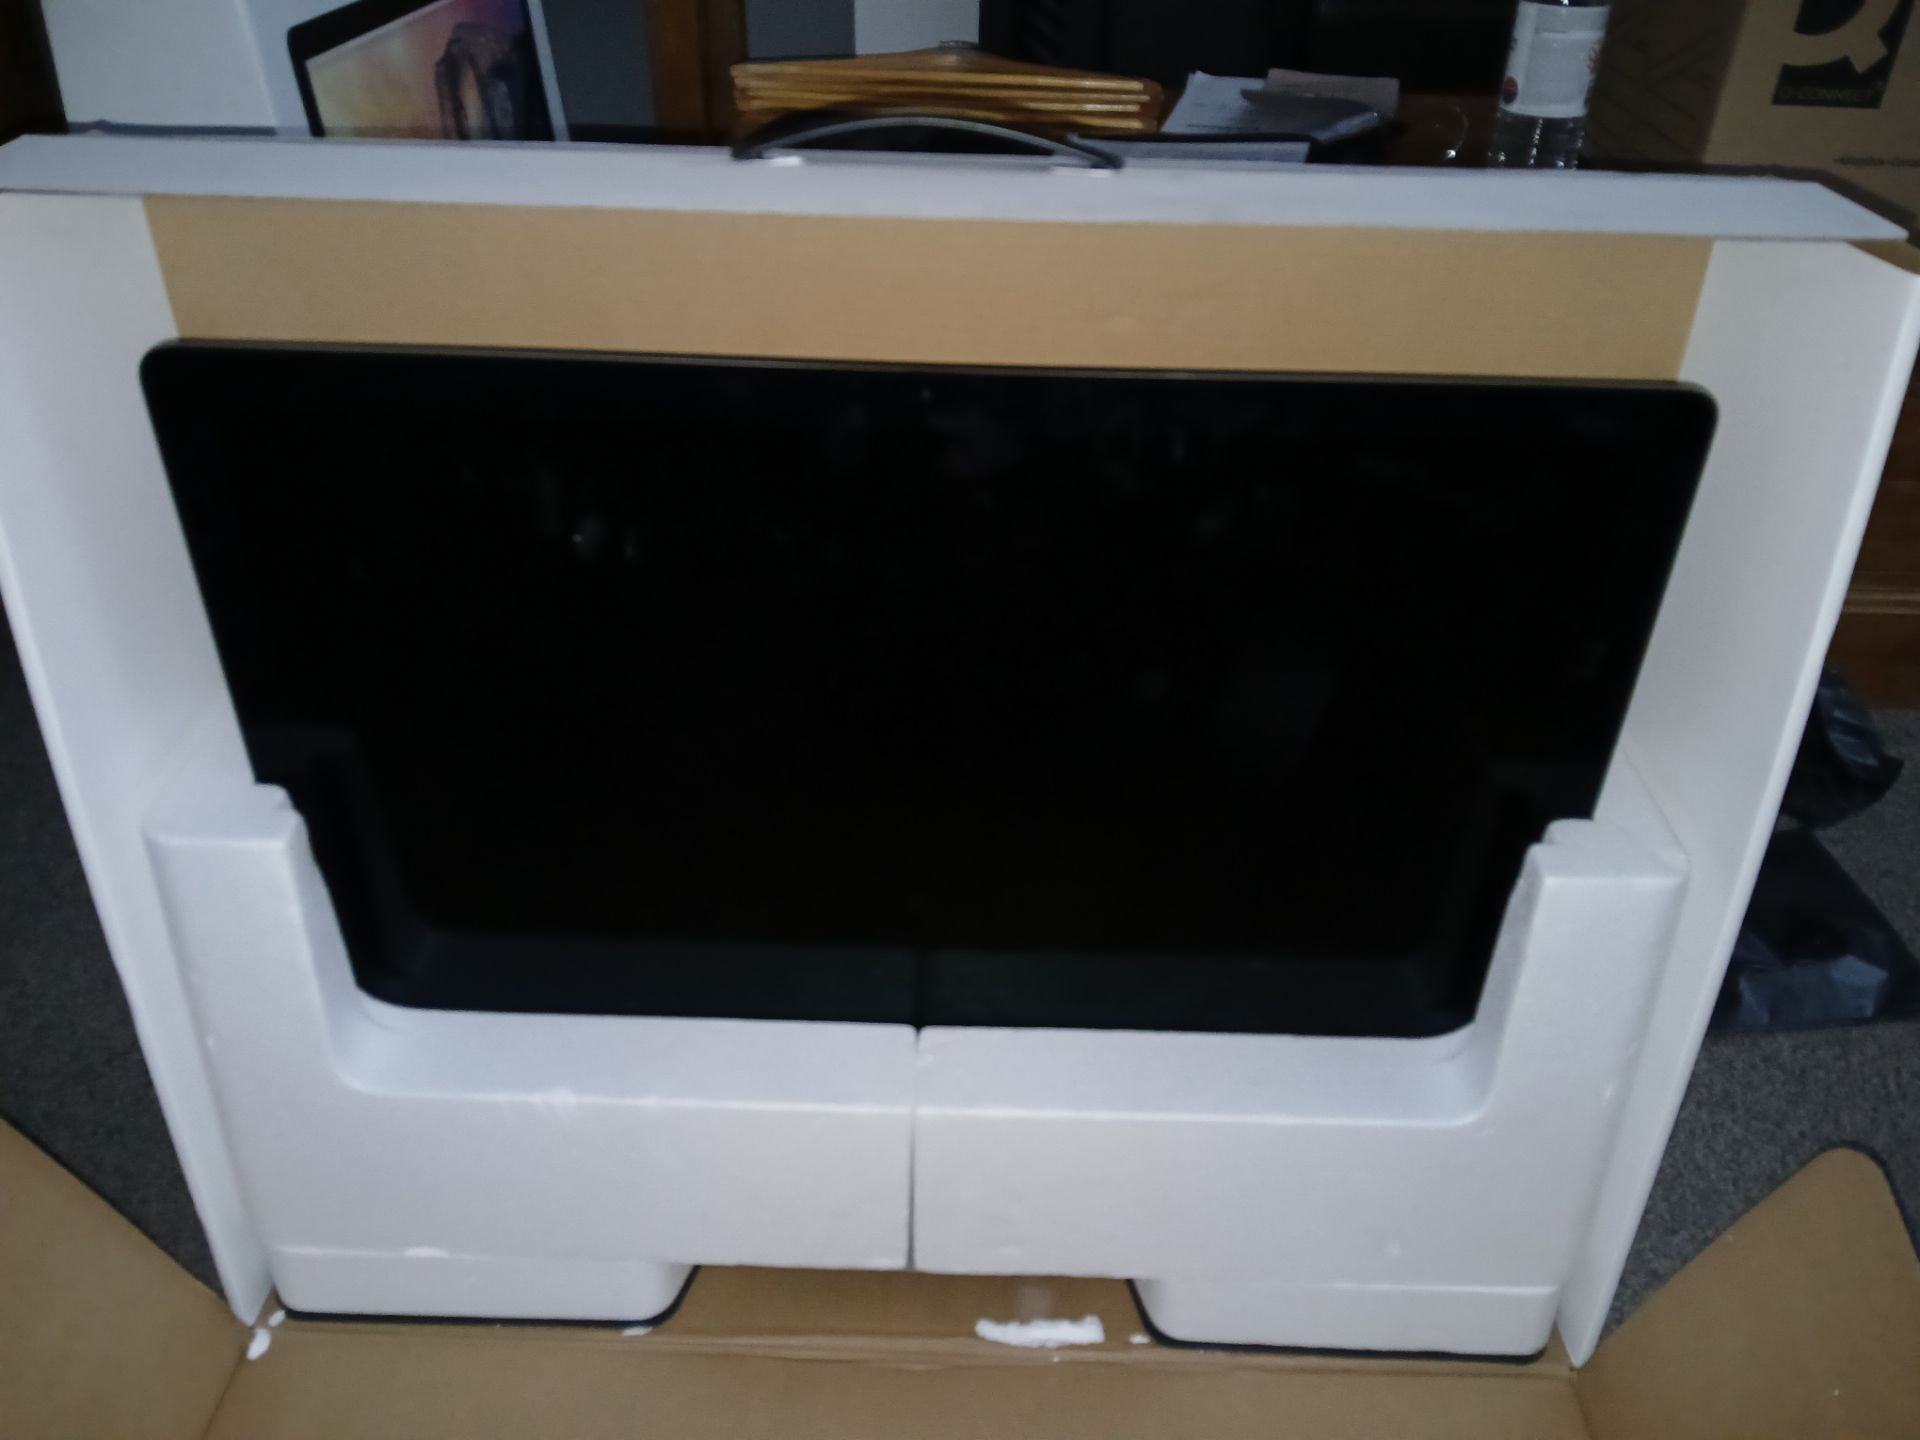 Apple iMac (Retina 5K, 27”, Mid 2015), Serial Number DGKQ306WFY13, with keyboard (No Mouse or - Image 14 of 14